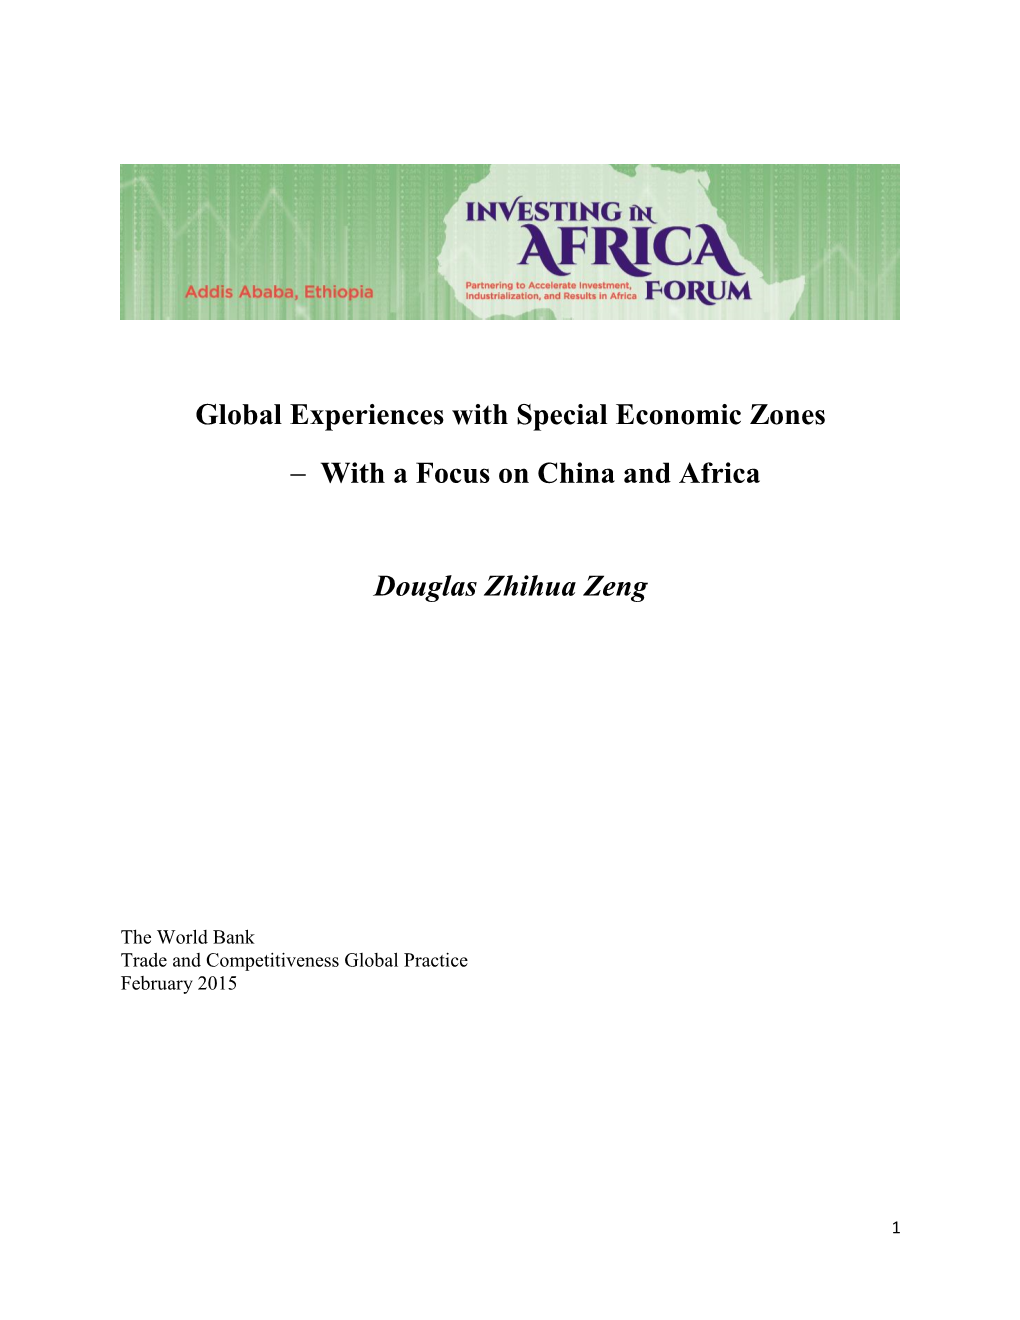 Global Experiences with Special Economic Zones  with a Focus on China and Africa